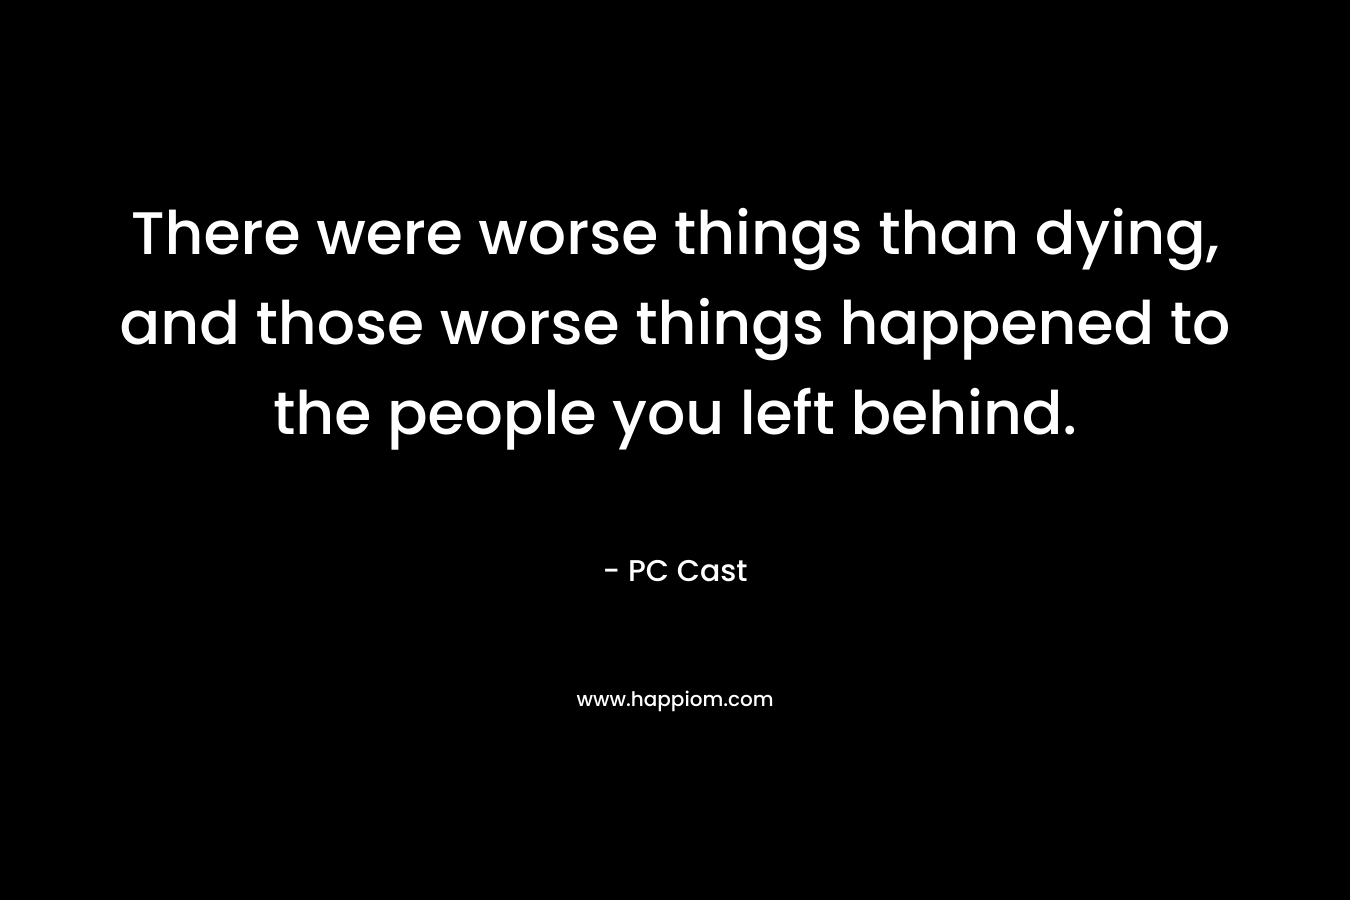 There were worse things than dying, and those worse things happened to the people you left behind. – PC Cast